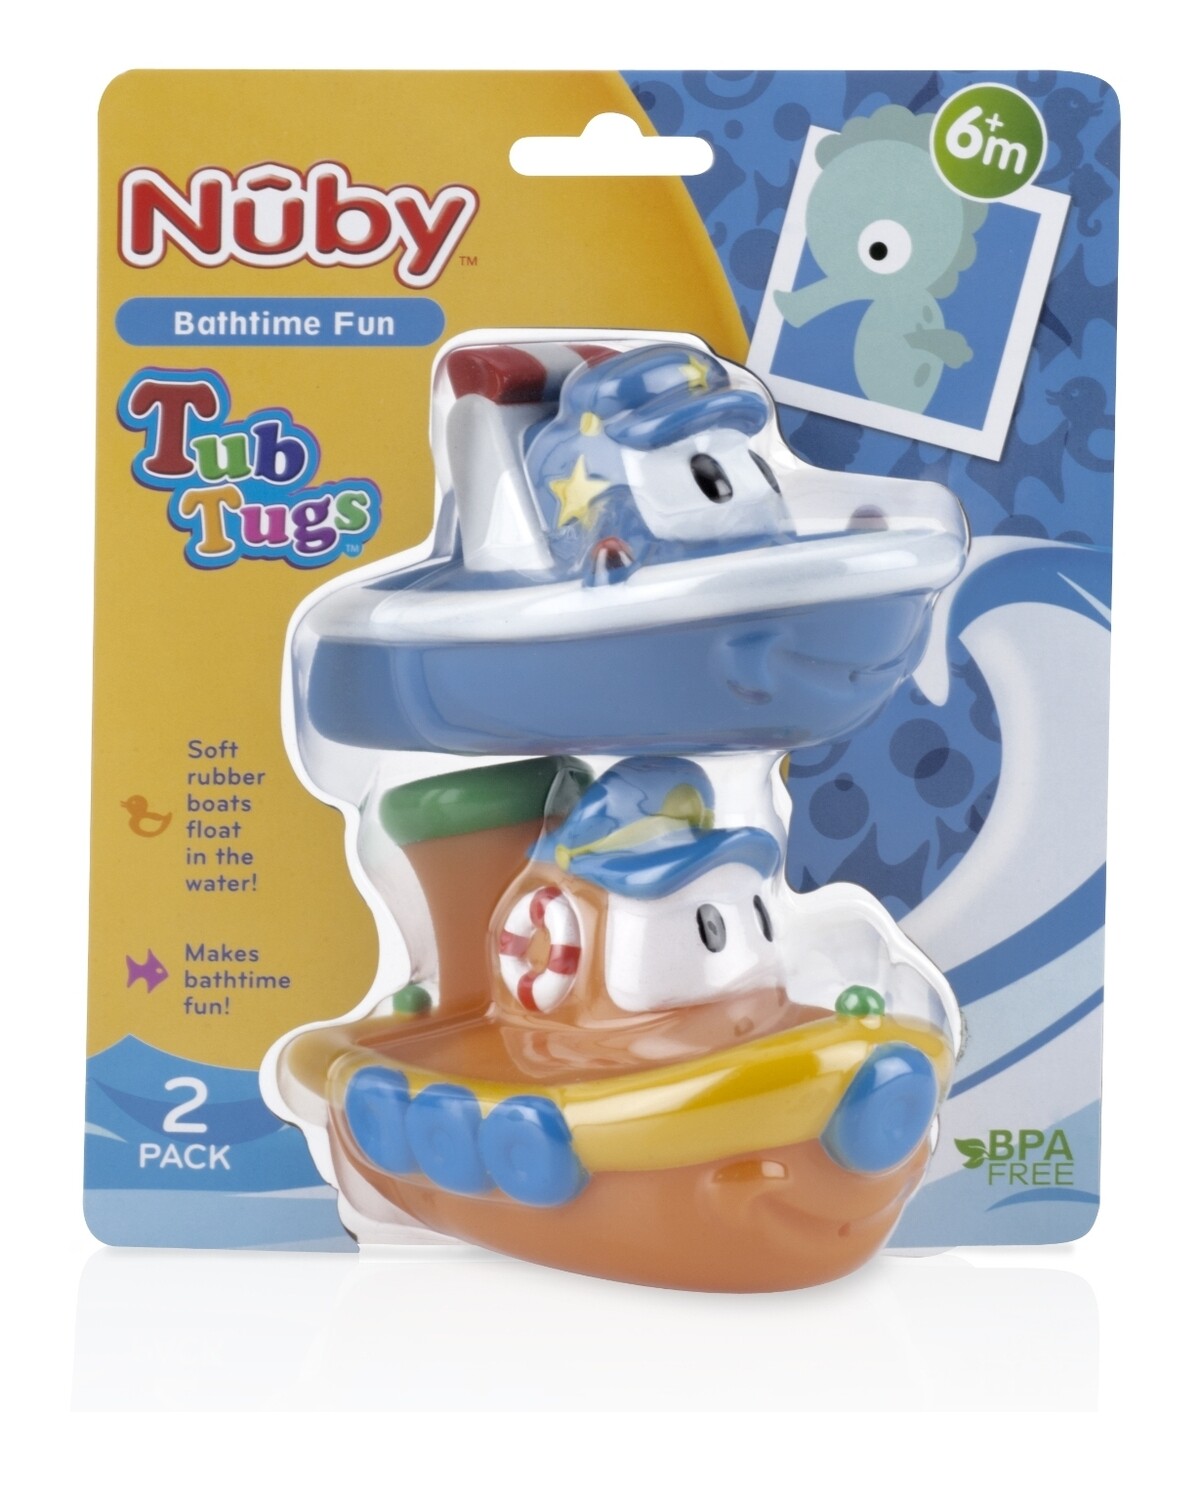 . Case of [24] Nuby Tub Tugs Bath Toys - 2 Pack, Colors May Vary .